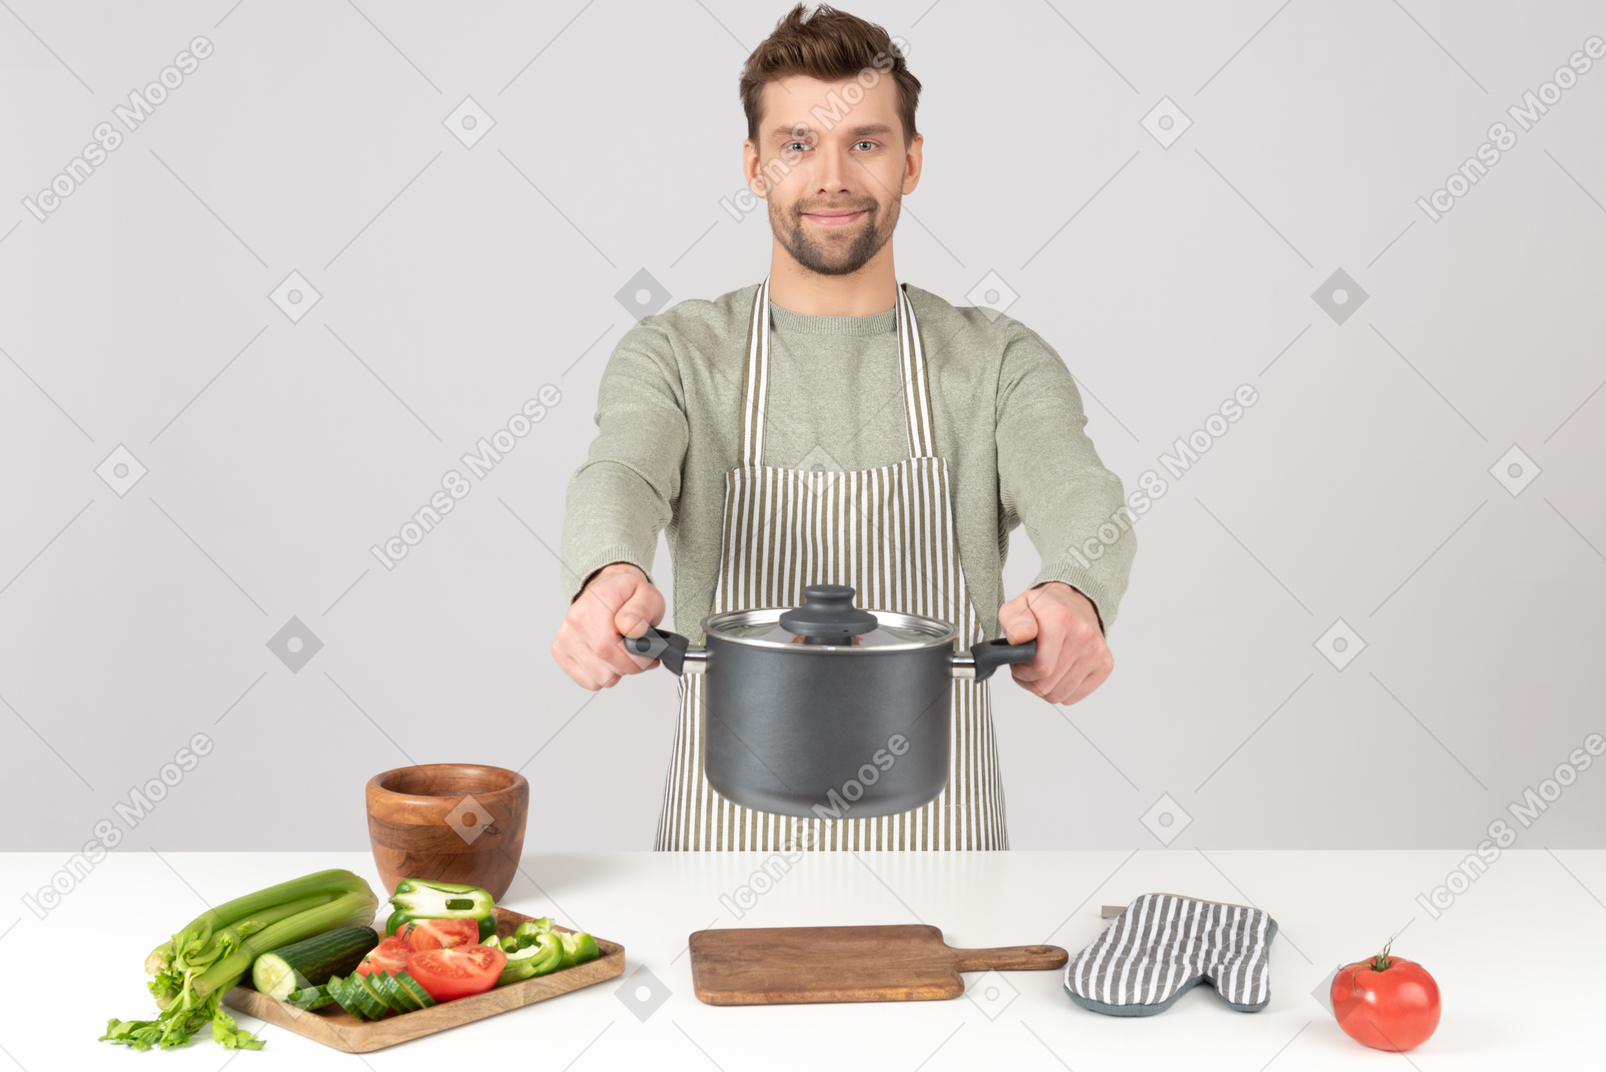 How about to taste what i've cooked for you?